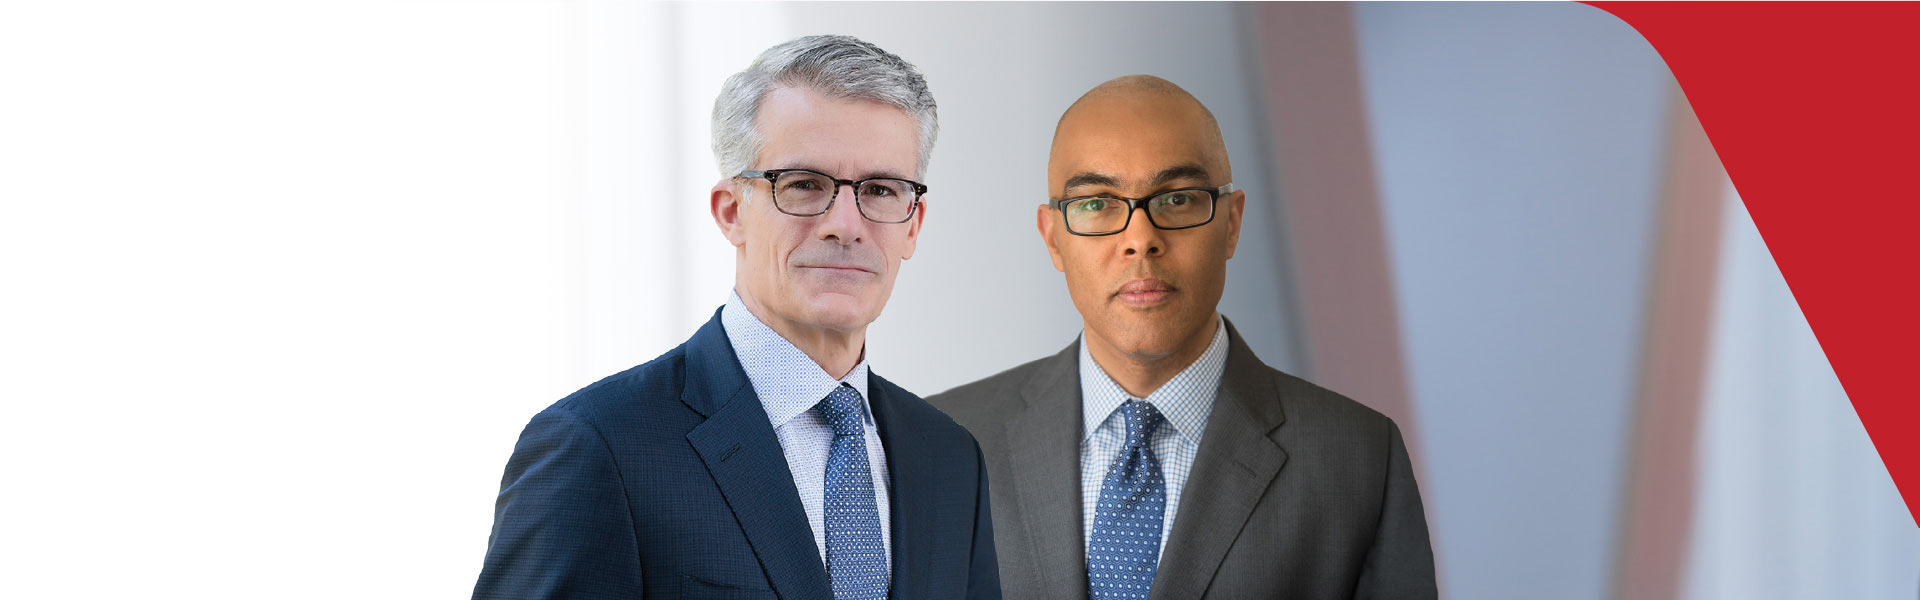 Portraits of Tim Buckley, Vanguard’s chief executive officer, and Greg Davis, Vanguard’s chief investment officer.